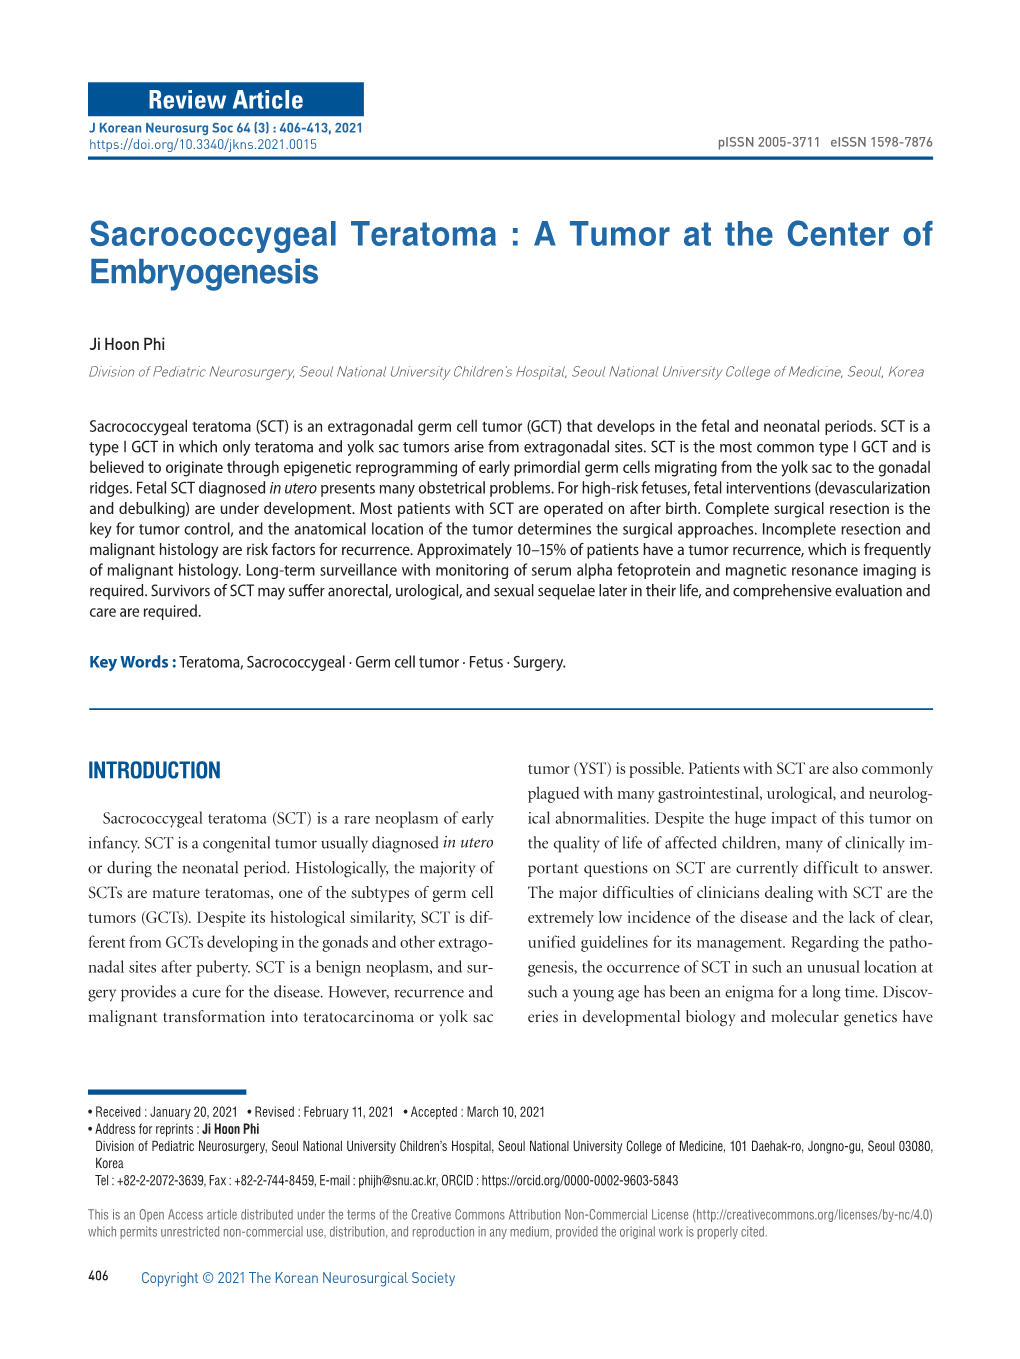 Sacrococcygeal Teratoma : a Tumor at the Center of Embryogenesis